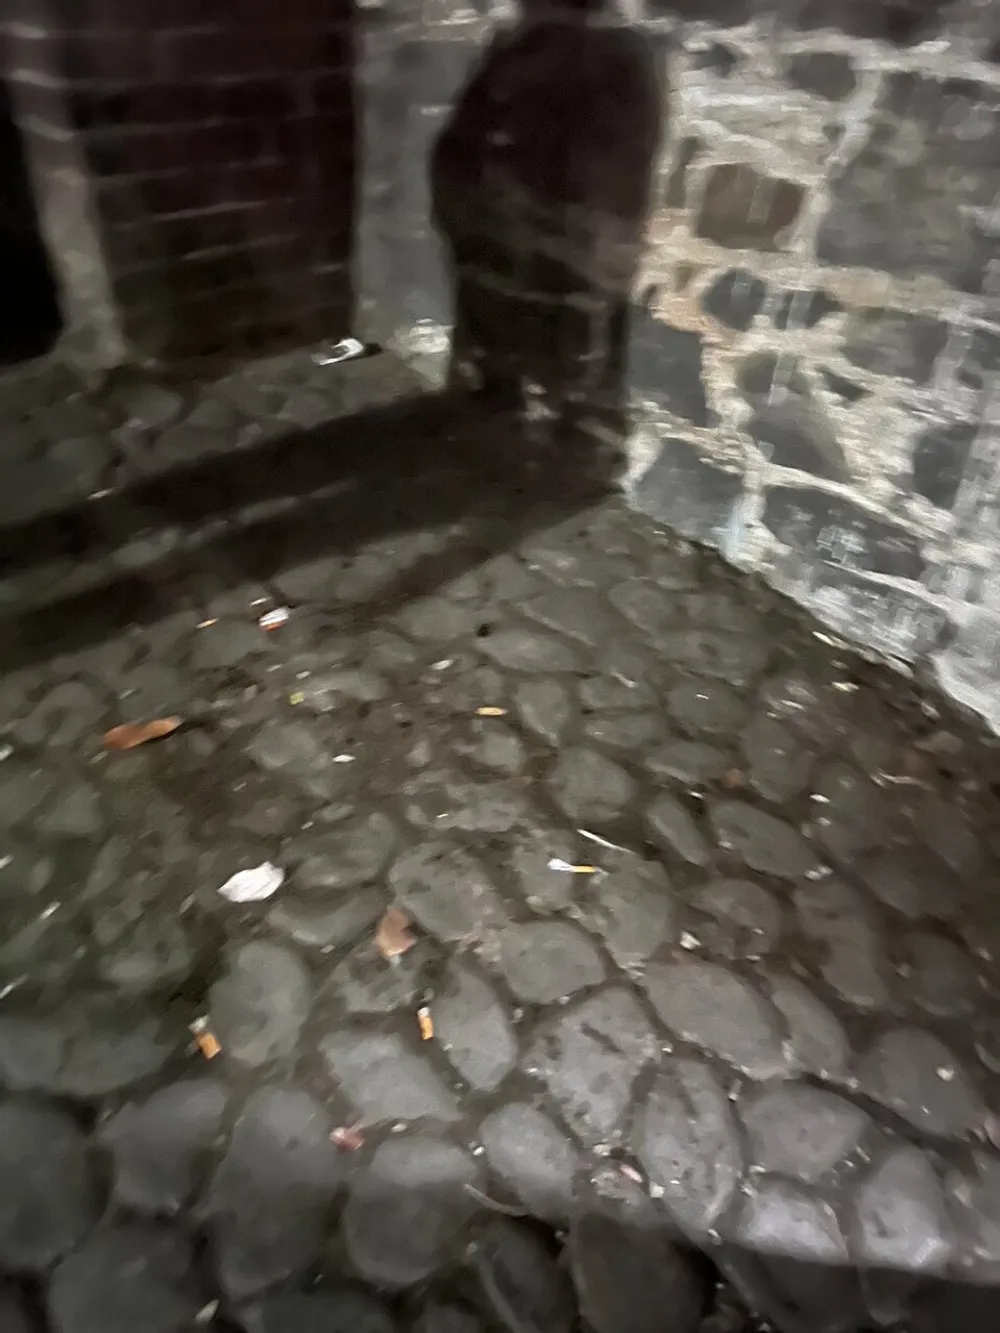 The image is a blurry shot of what appears to be a cobblestone pavement with a shadowy figure and some litter scattered around